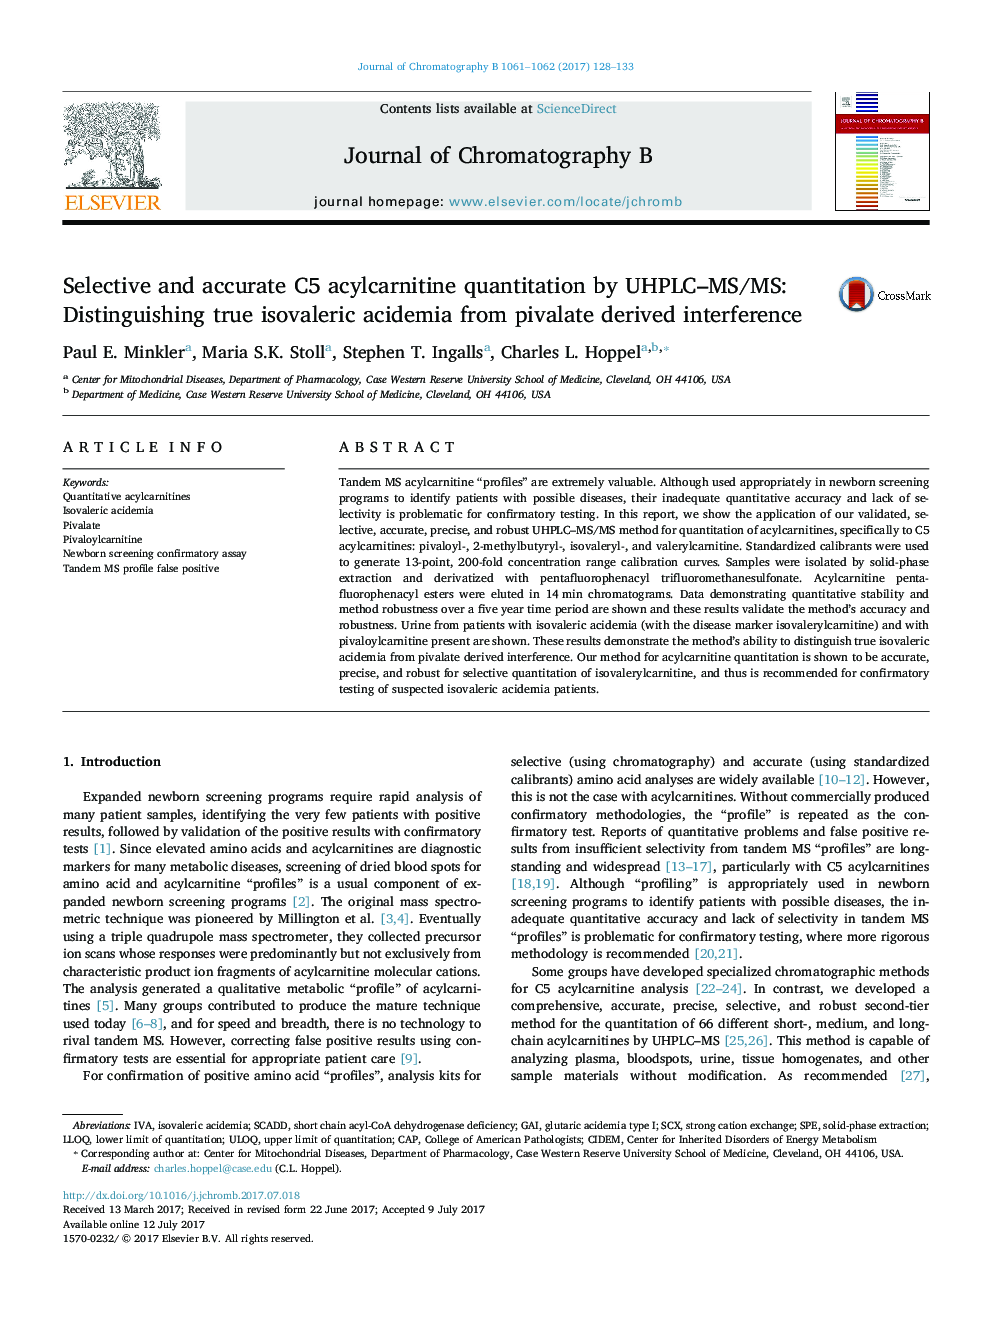 Selective and accurate C5 acylcarnitine quantitation by UHPLC-MS/MS: Distinguishing true isovaleric acidemia from pivalate derived interference